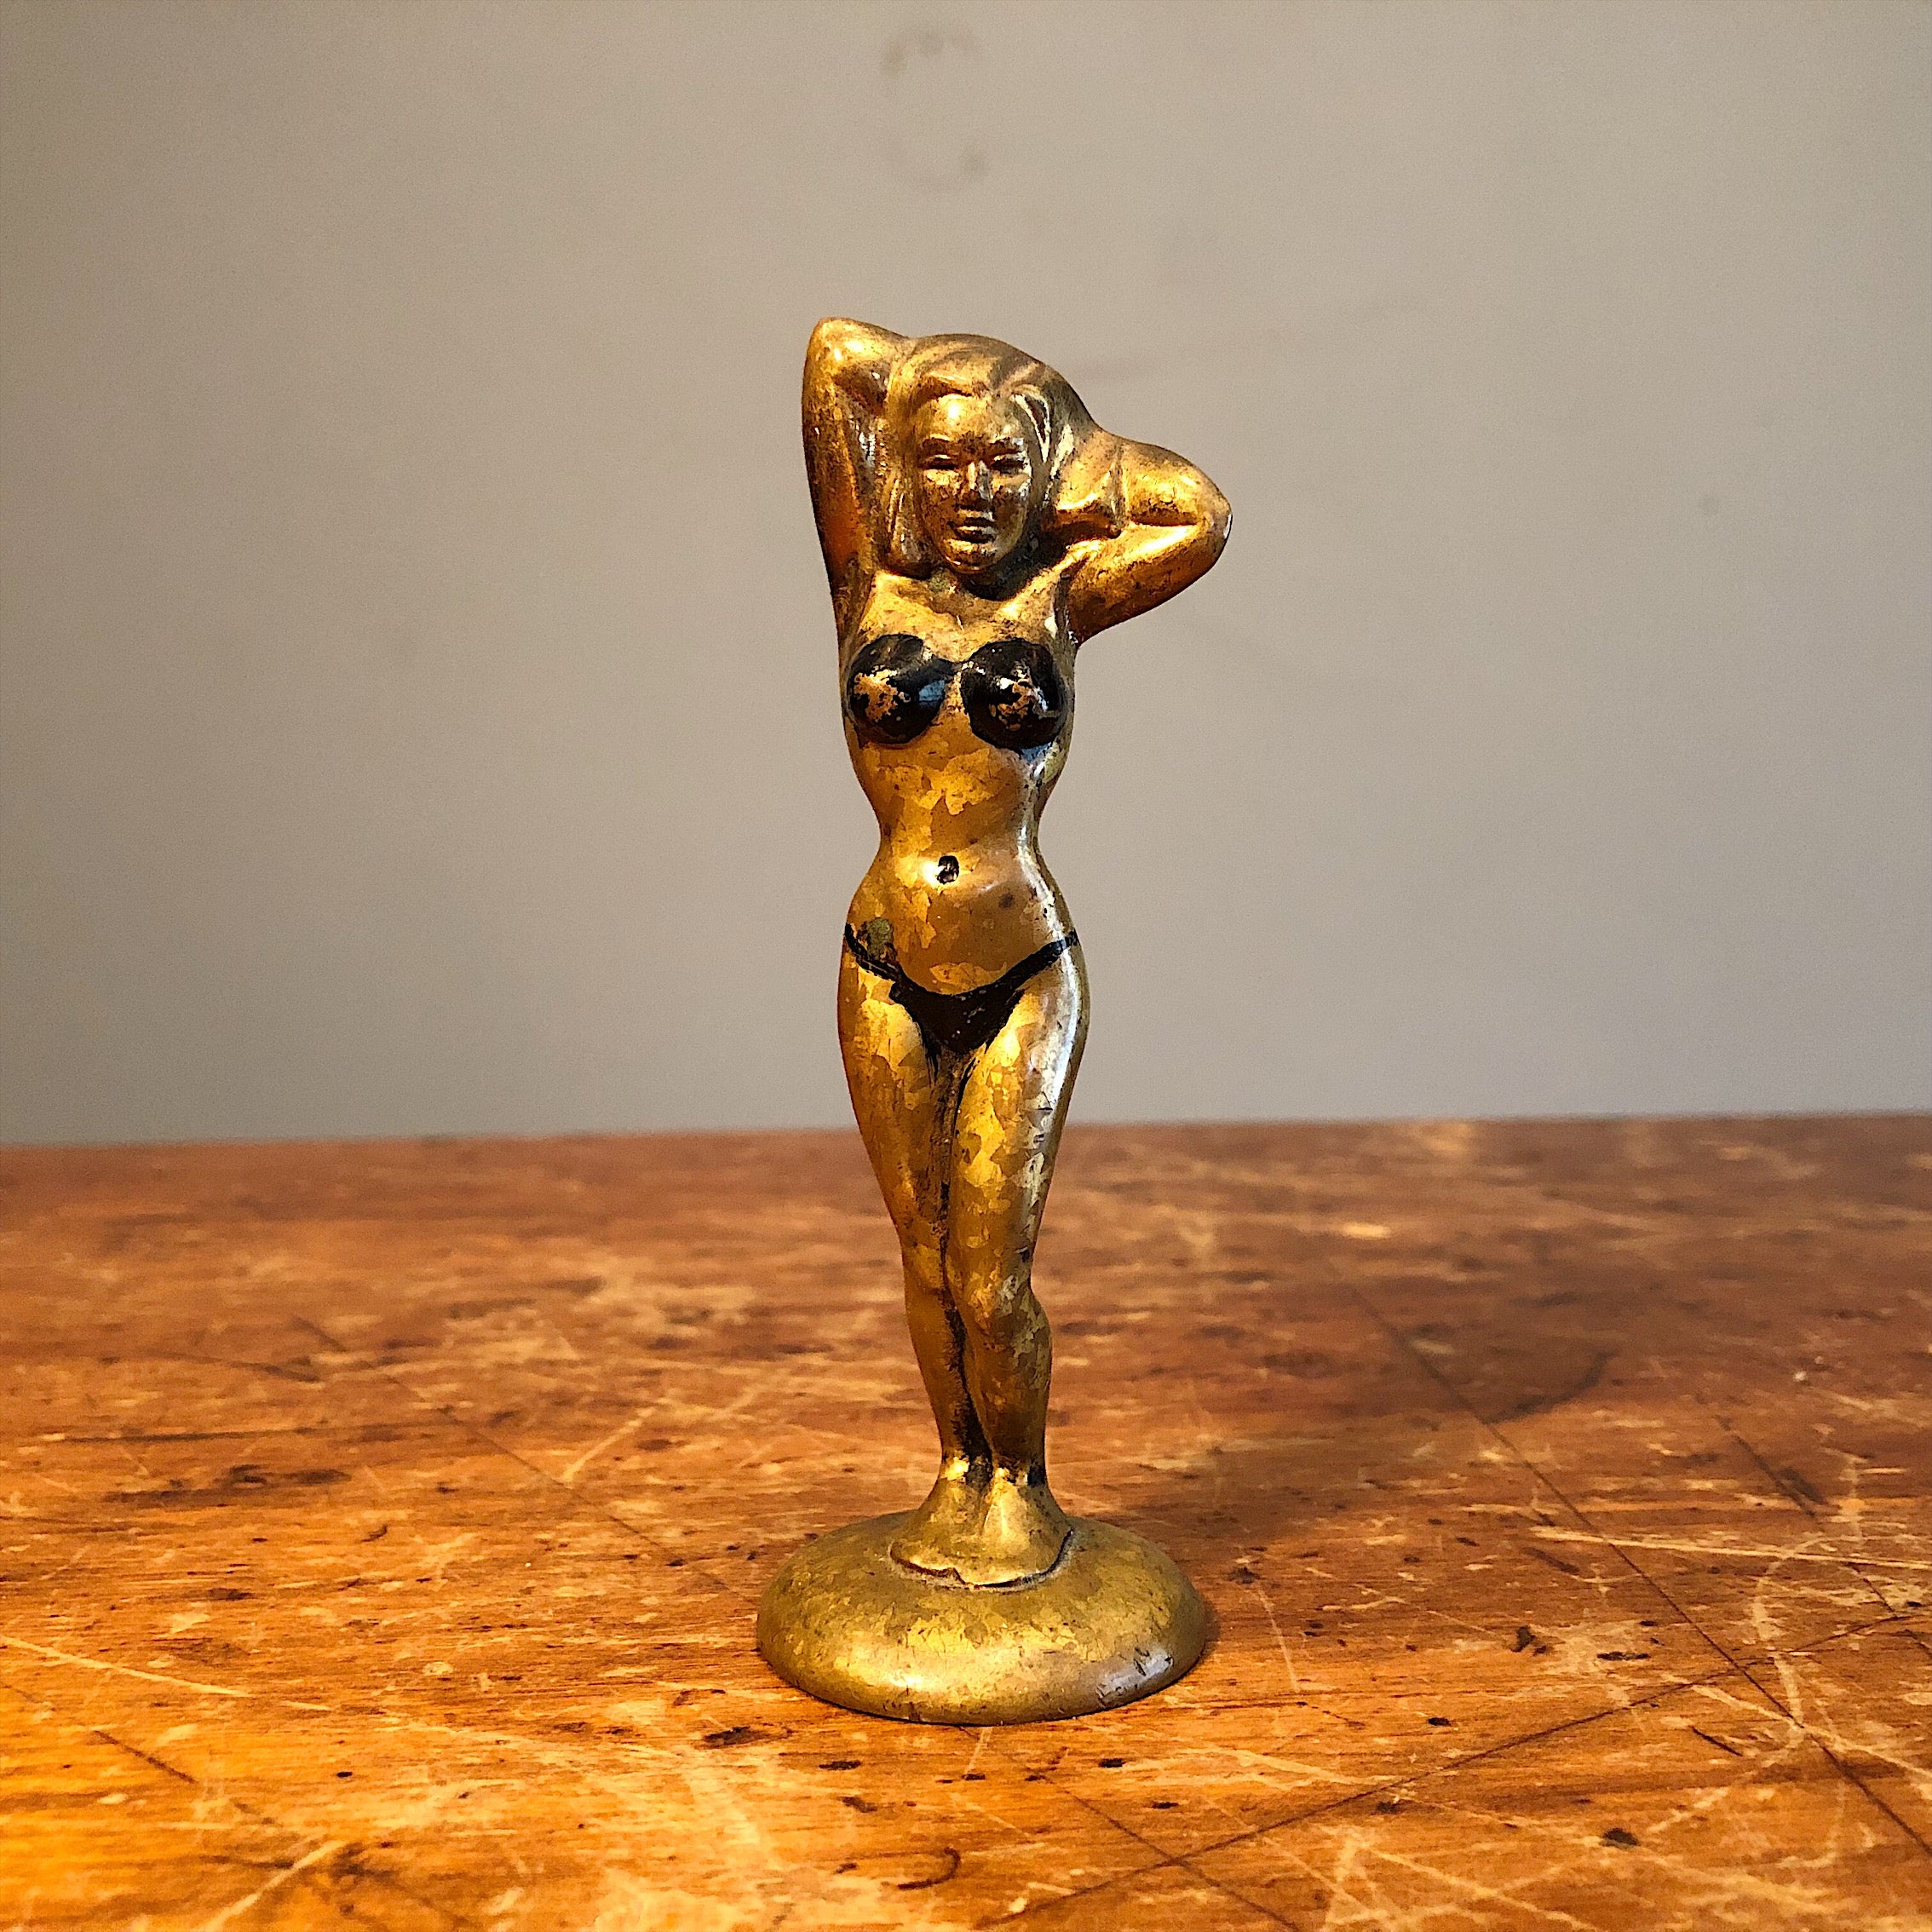 Art Deco Nude Woman Bottle Opener - Vintage Brass Breweriana - 1920s - Rare Deco Collectibles